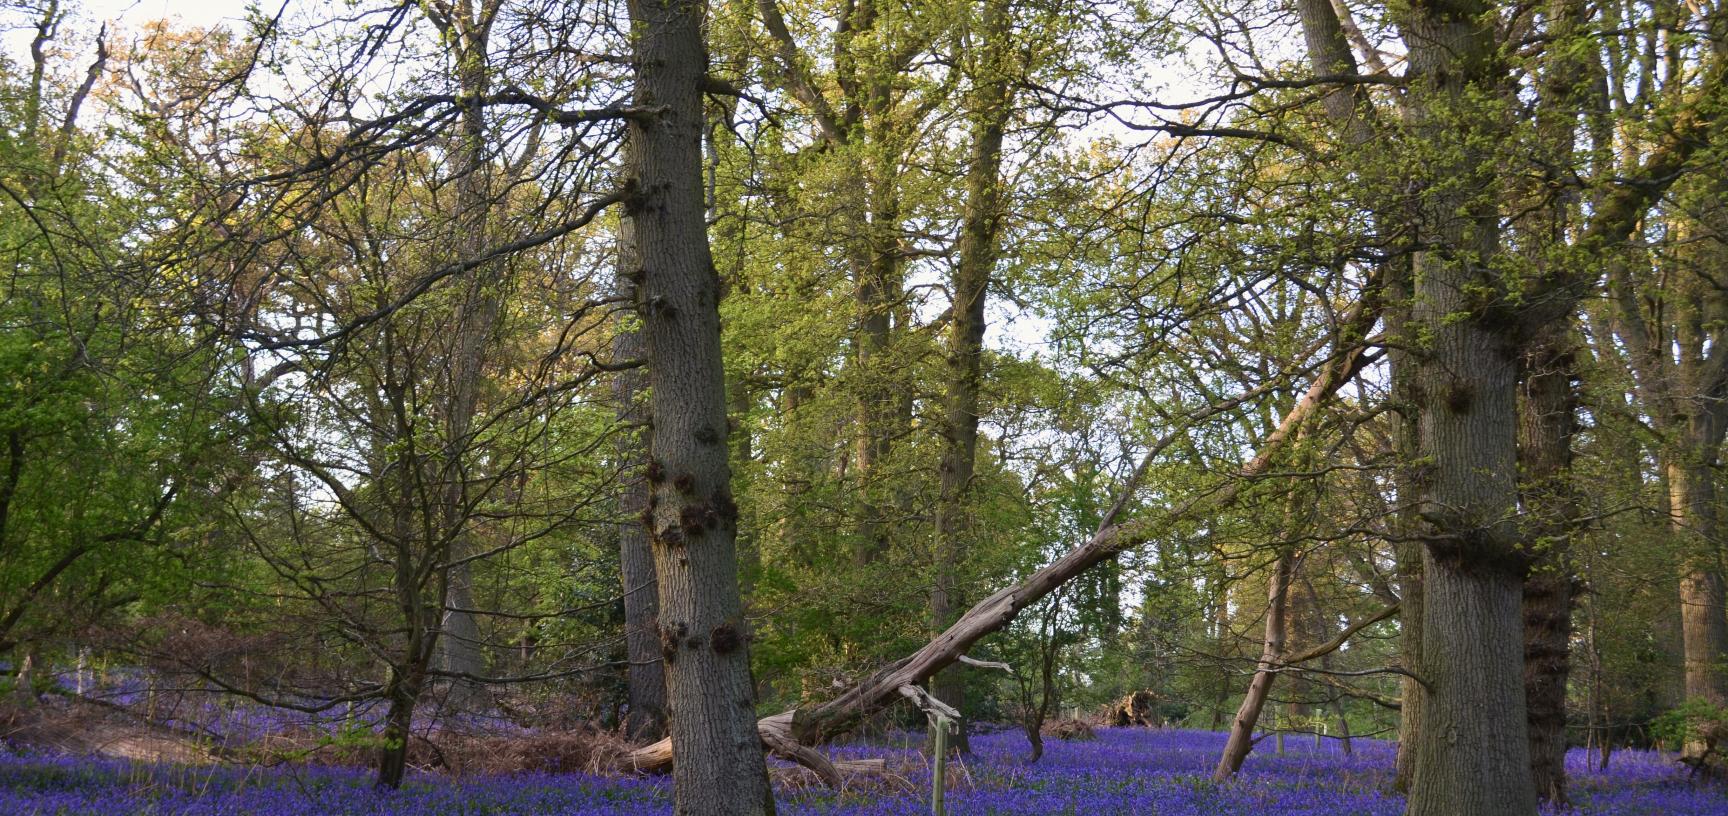 Bluebell Wood in May